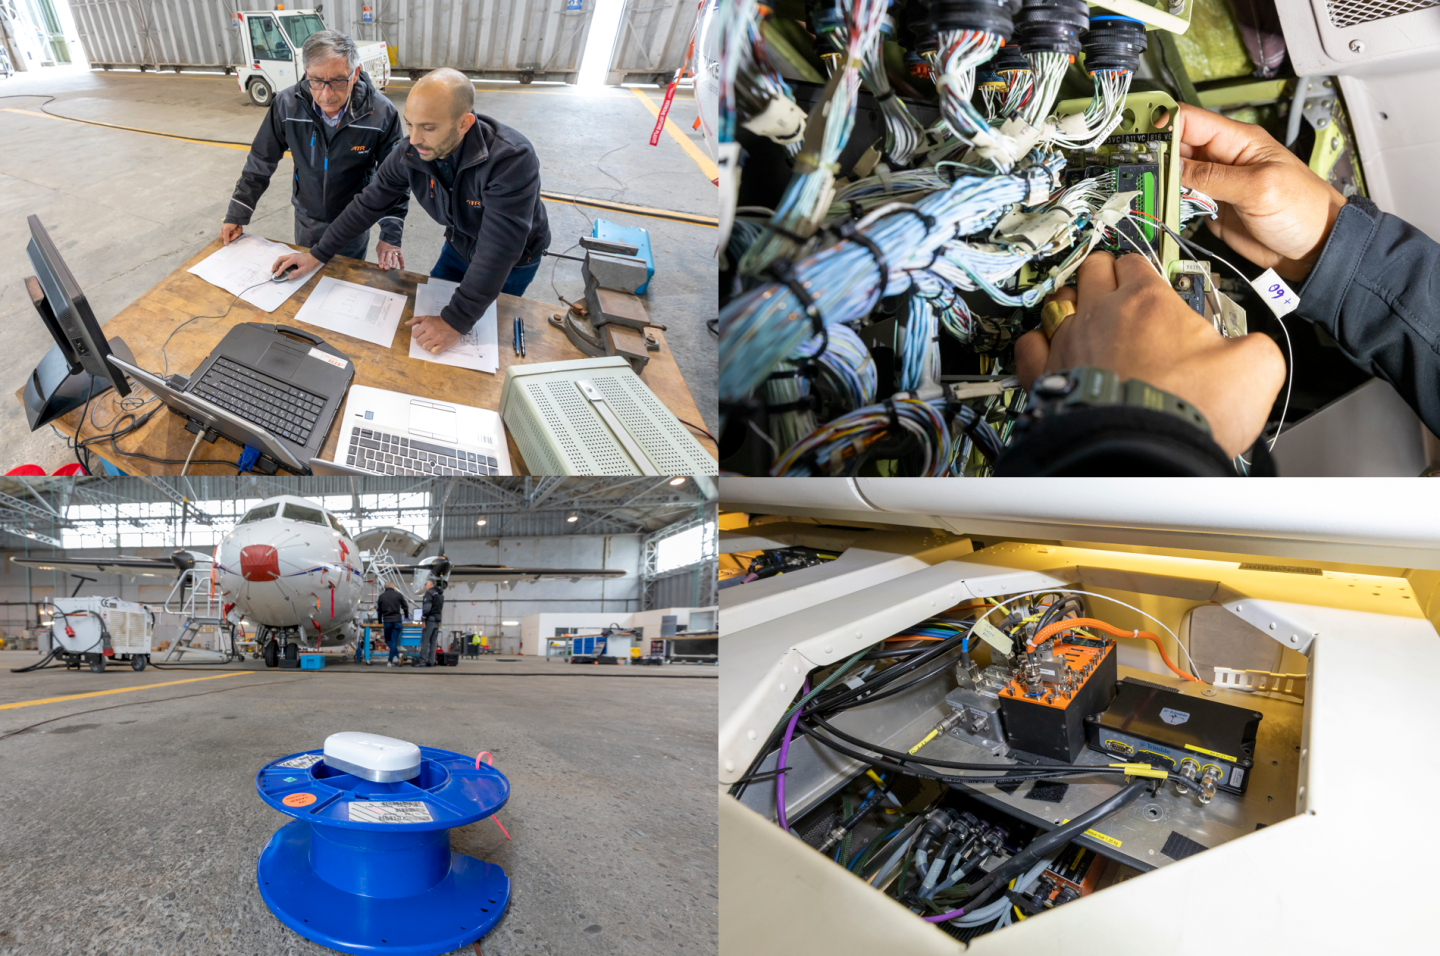 Photos taken during the ground tests performed in the framework of the SENS4ICE project in April 2022. See the photos in the article below for detailed captions.